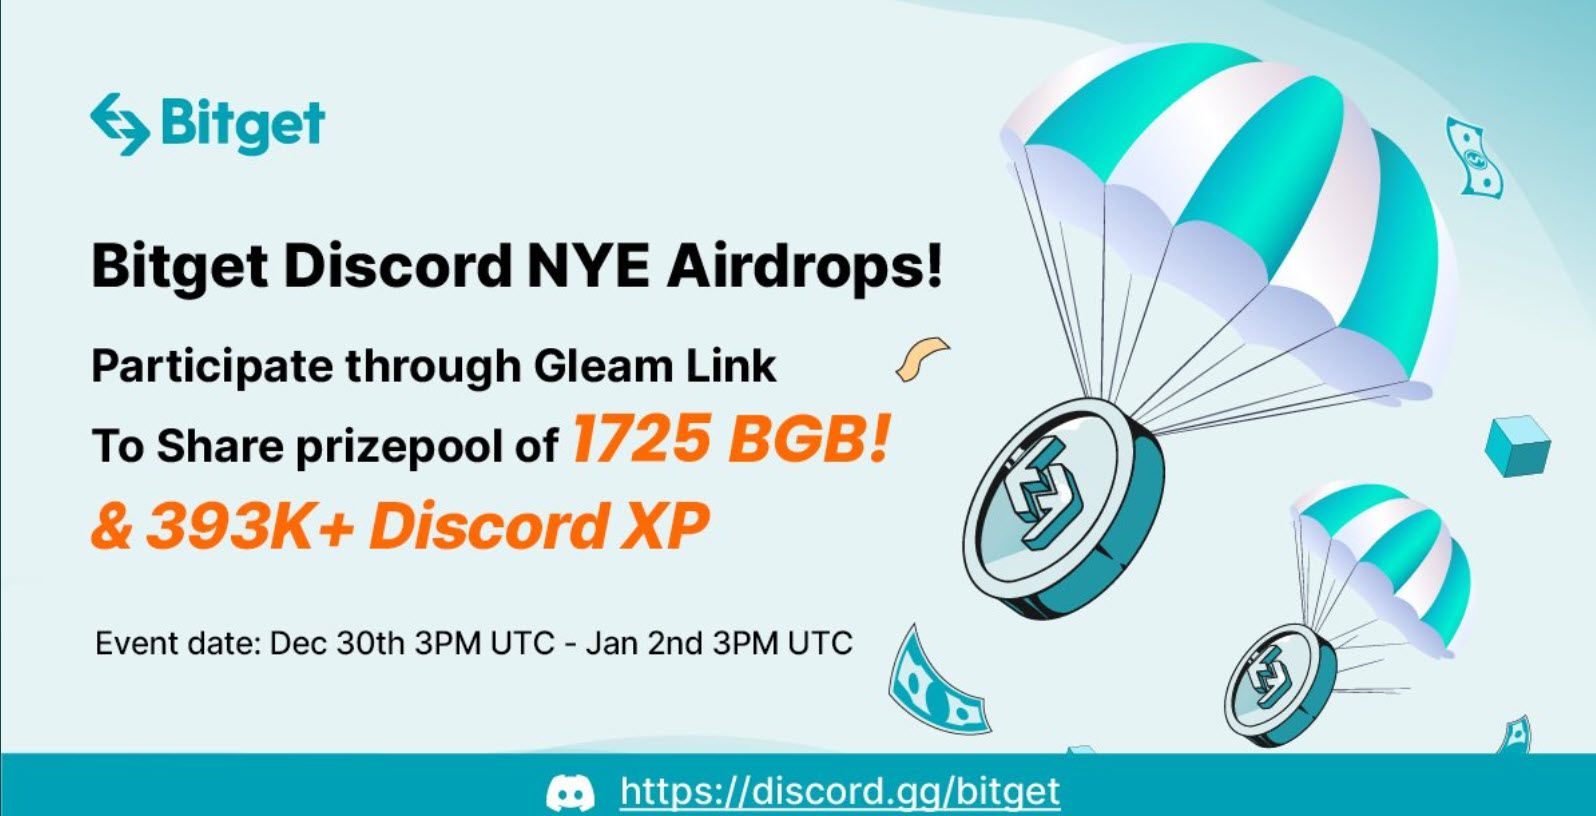 Celebrate the NYE, and join #Bitget Discord NYE Airdrops!